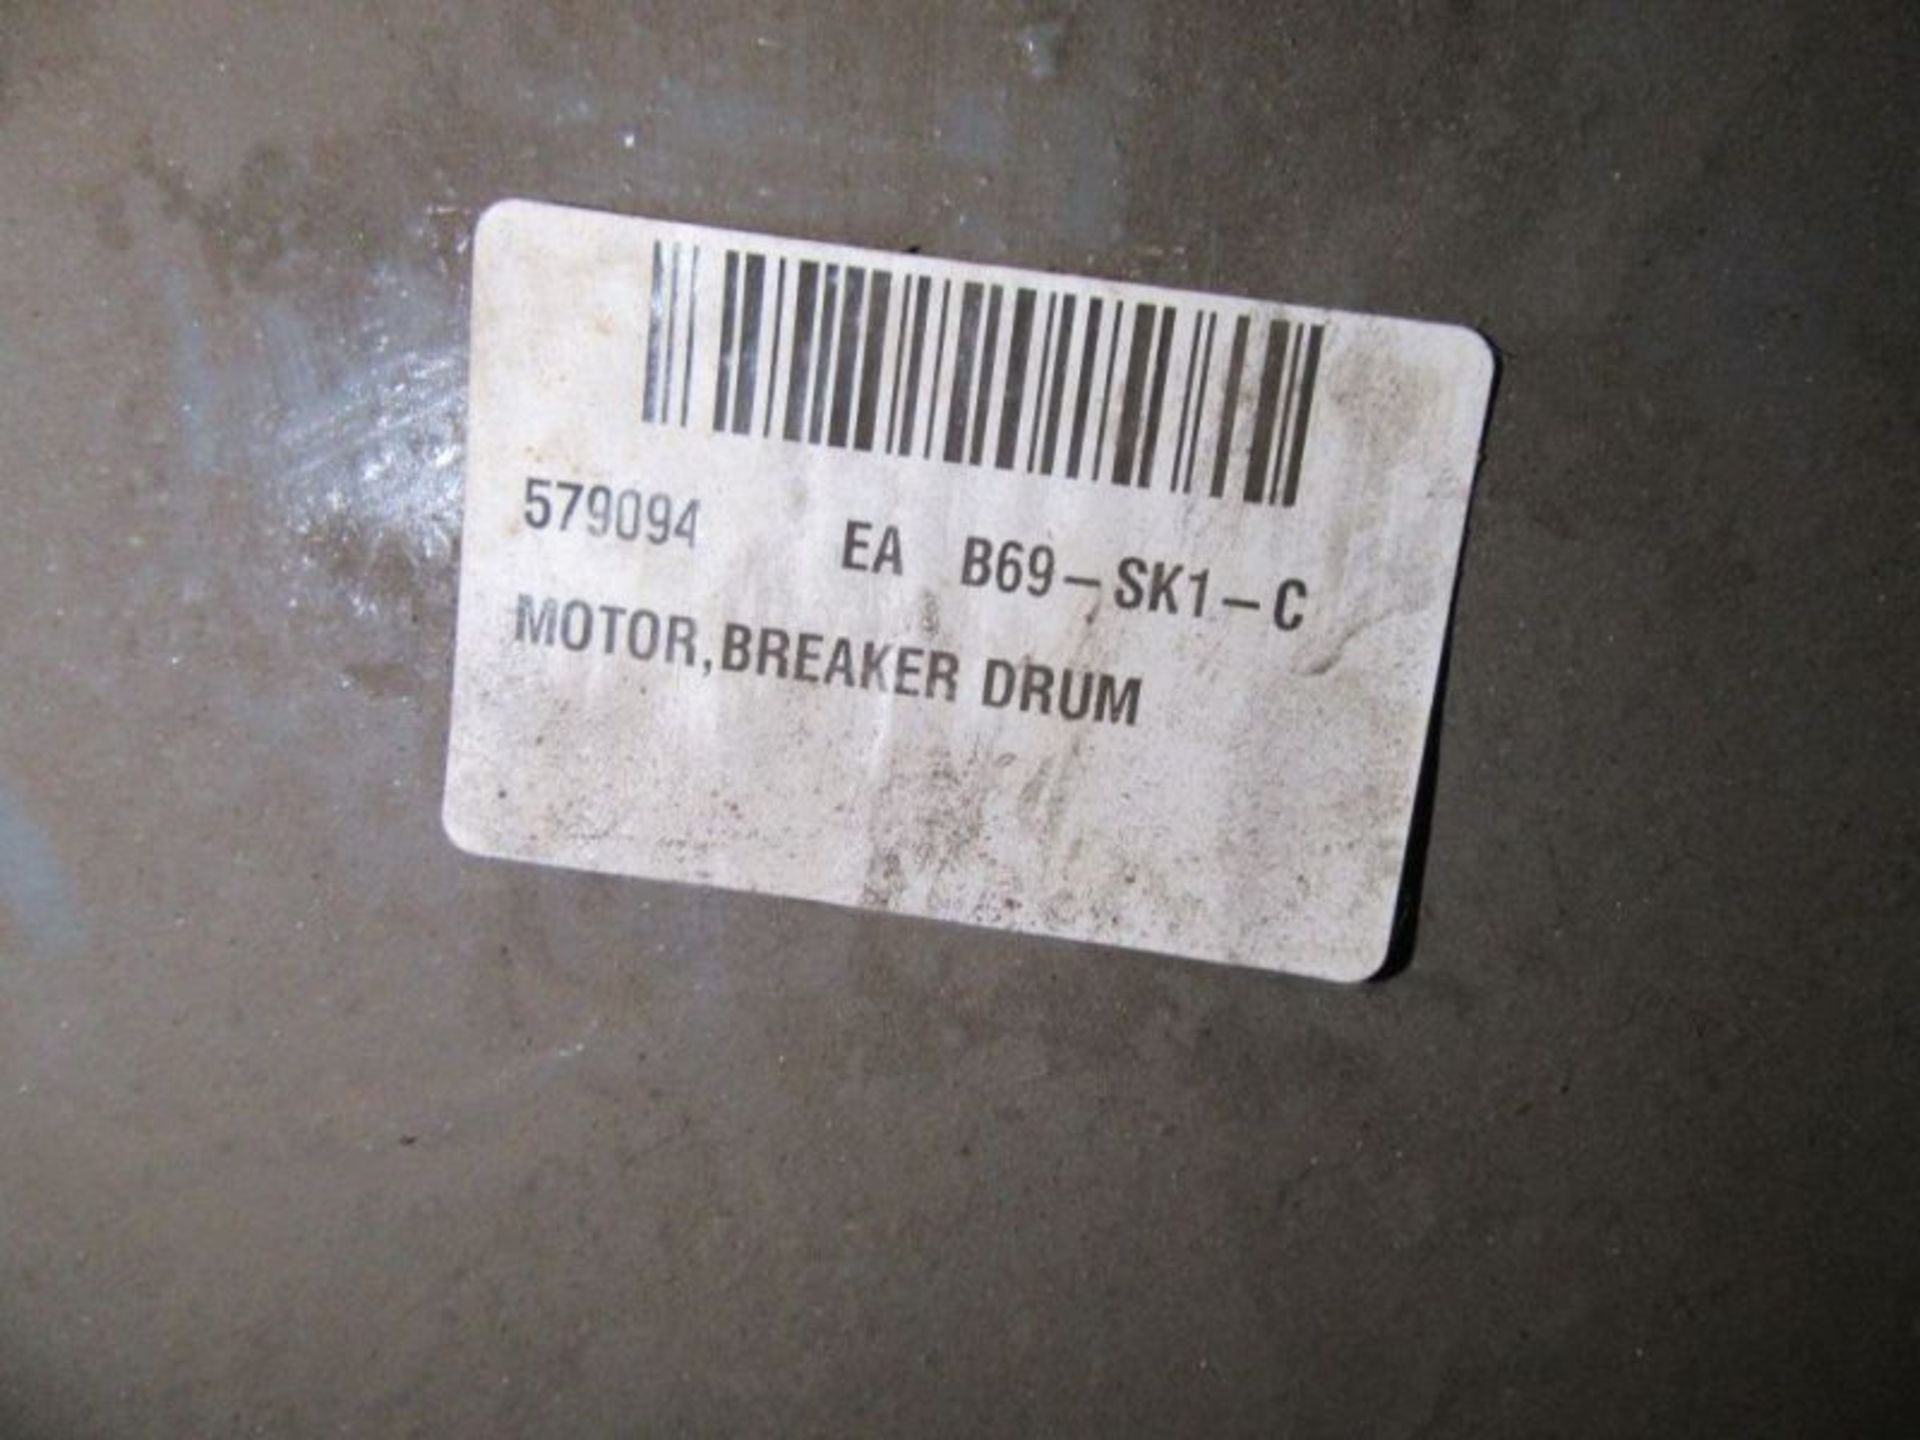 WESTINGHOUSE 150 HP INDUCTION MOTOR (FOR BREAKER DRUM) - Image 6 of 7